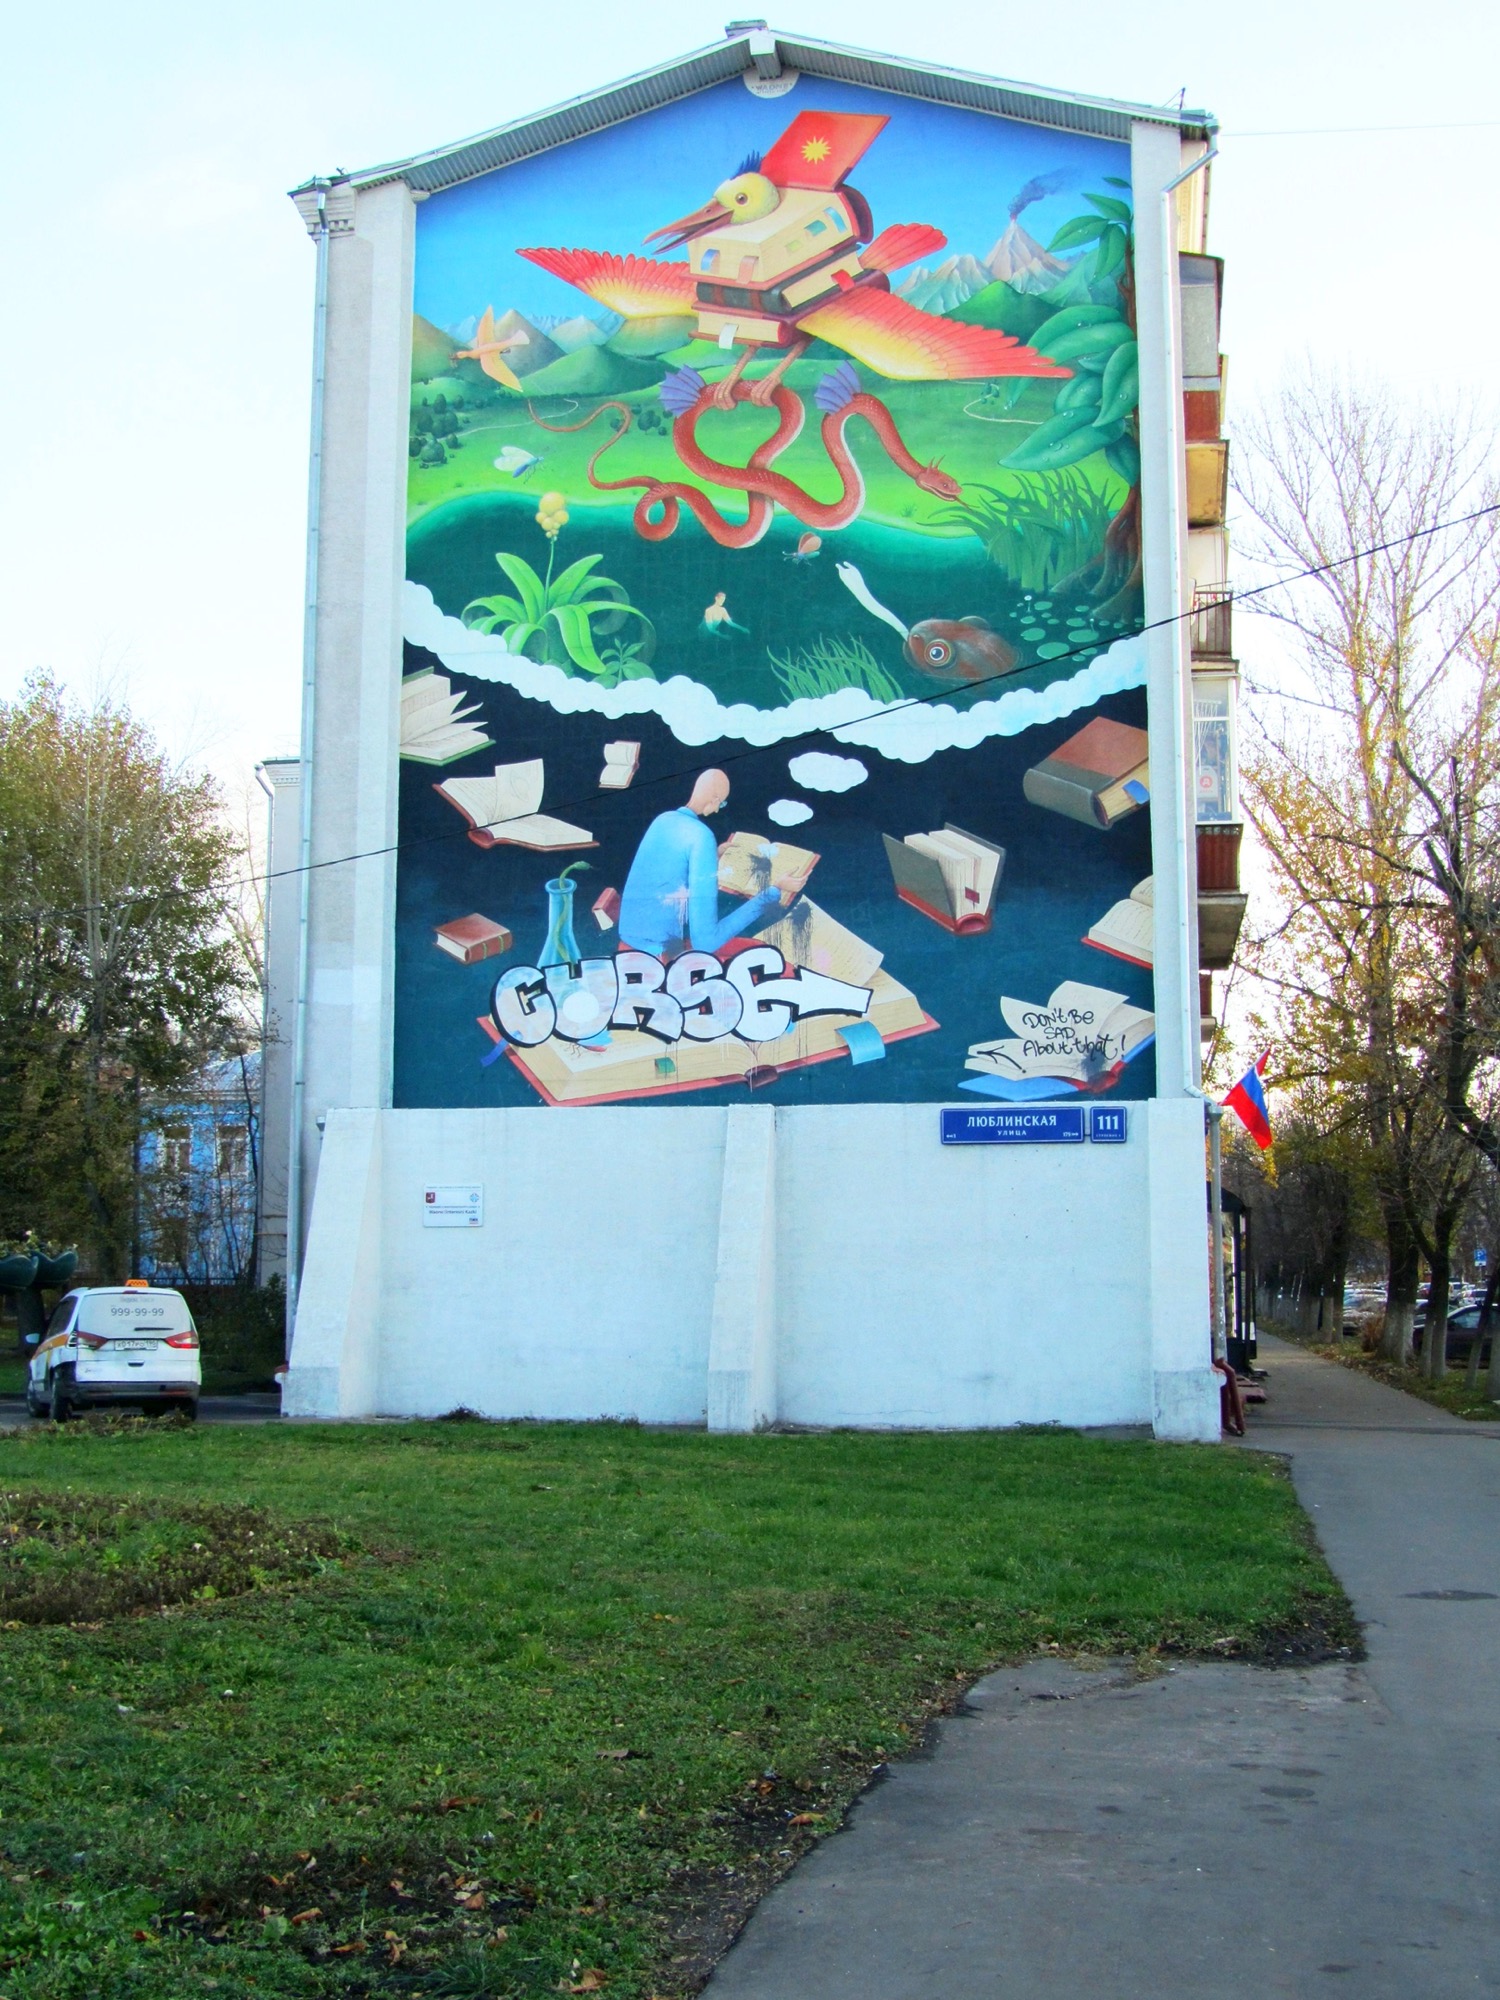 Graffiti 4256 The Soaring and Crawling Mind by the artist Waone captured by elettrotajik in Moscow Russia